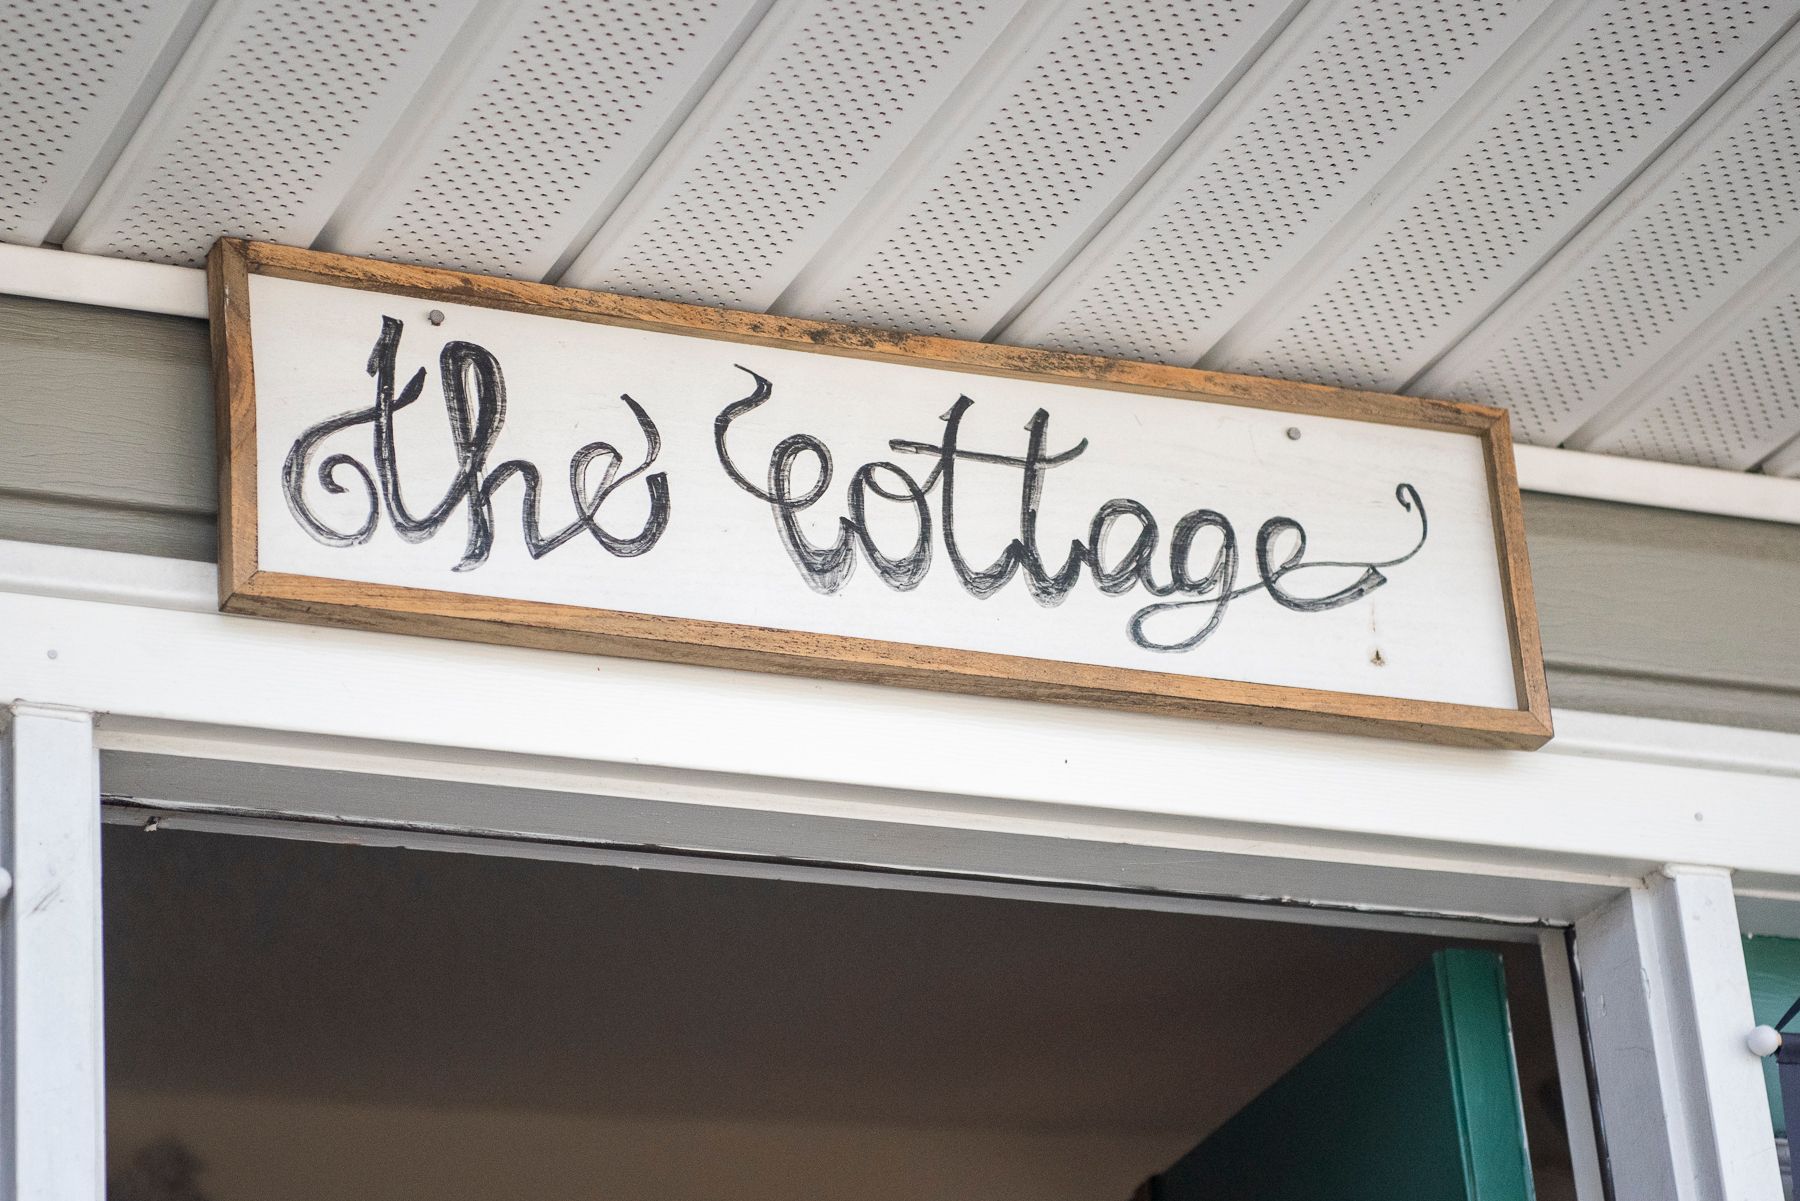 A sign that says "The Cottage" a boutique and gift shop in High Point, NC.